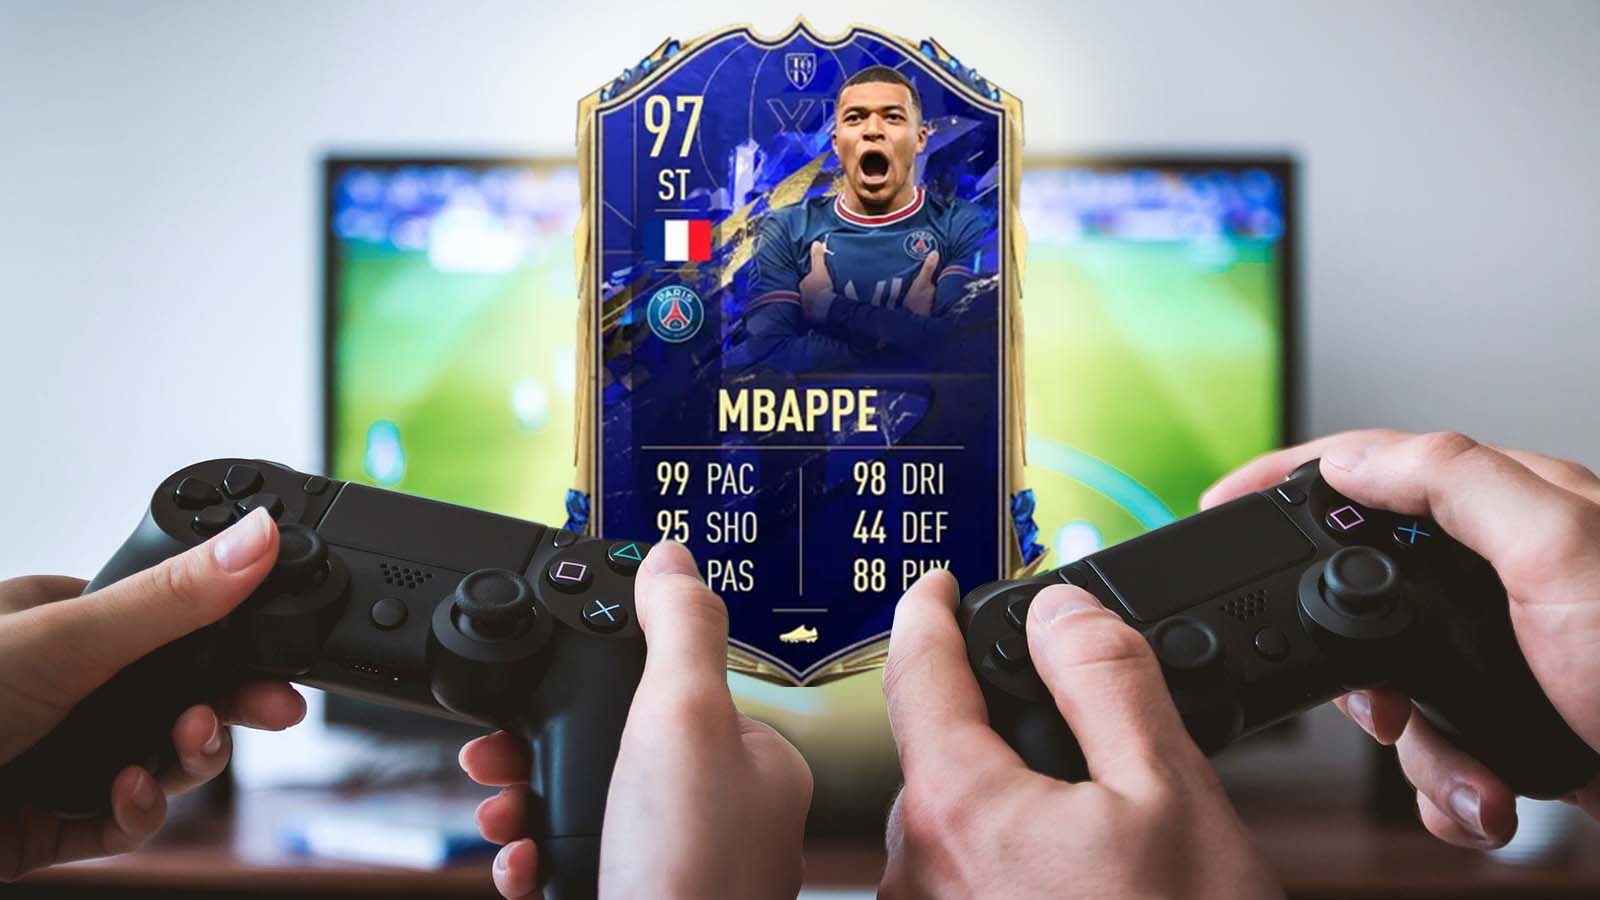 How many Player Packs does one need to get Mbappé in FIFA 22?